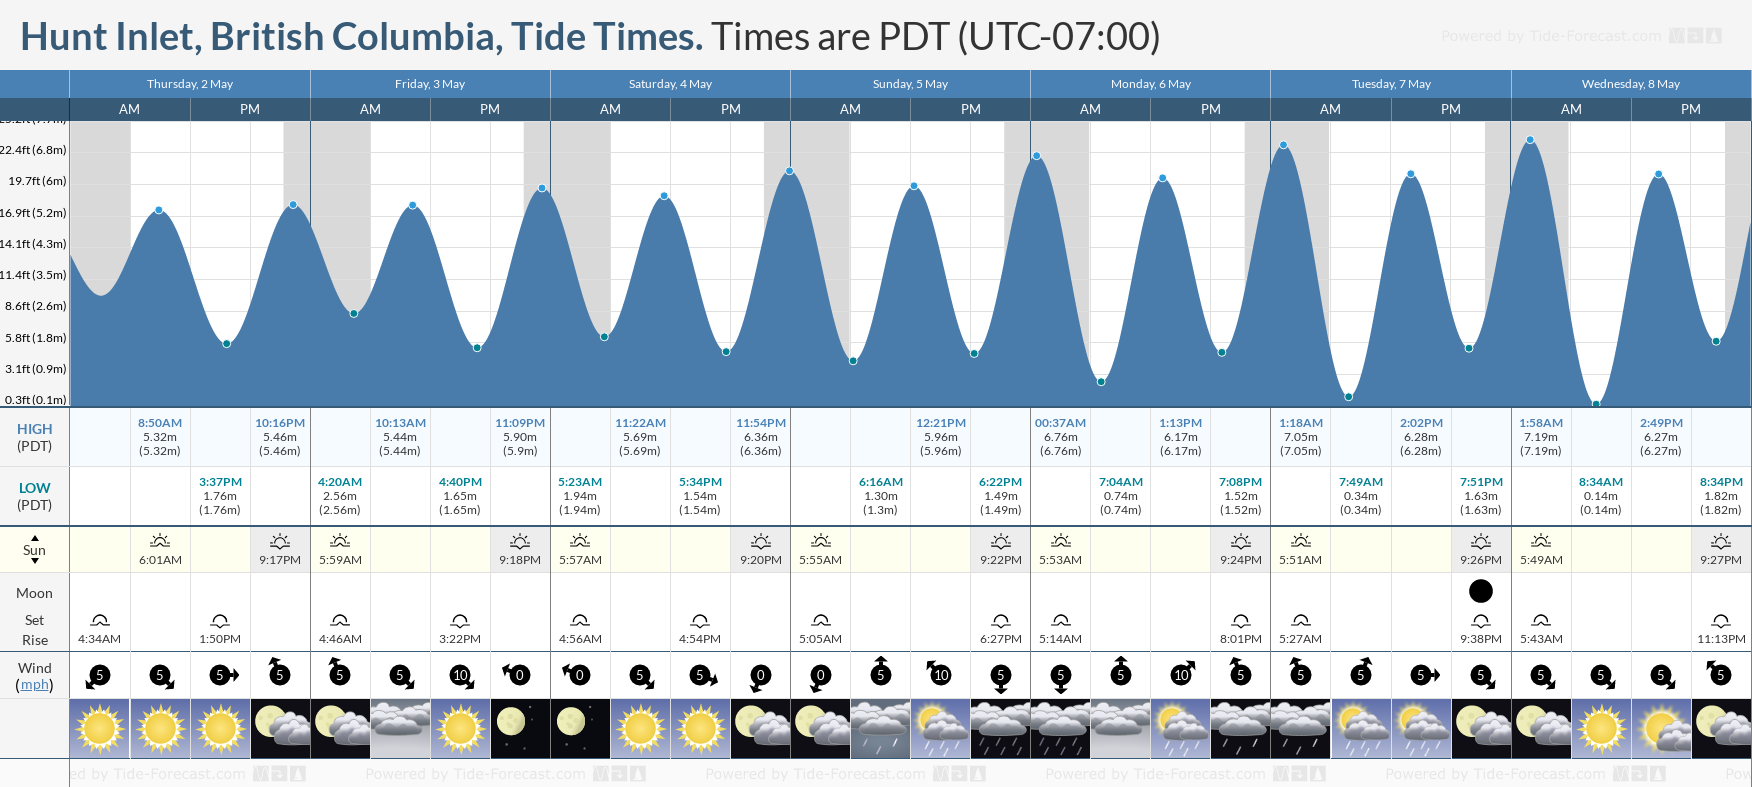 Hunt Inlet, British Columbia Tide Chart including high and low tide tide times for the next 7 days